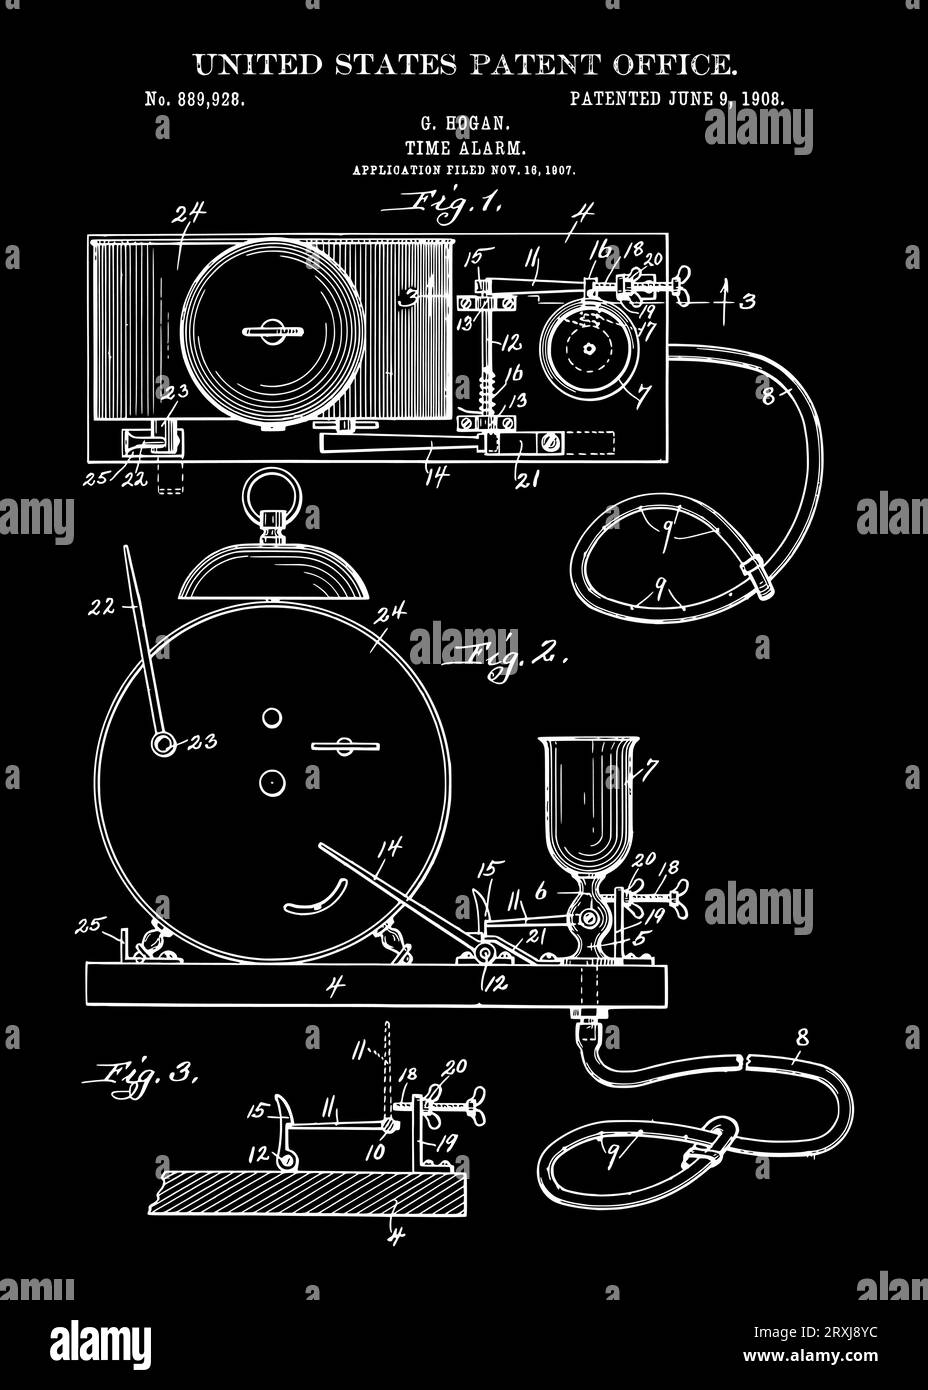 Vintage 1908 time alarm patent Stock Vector